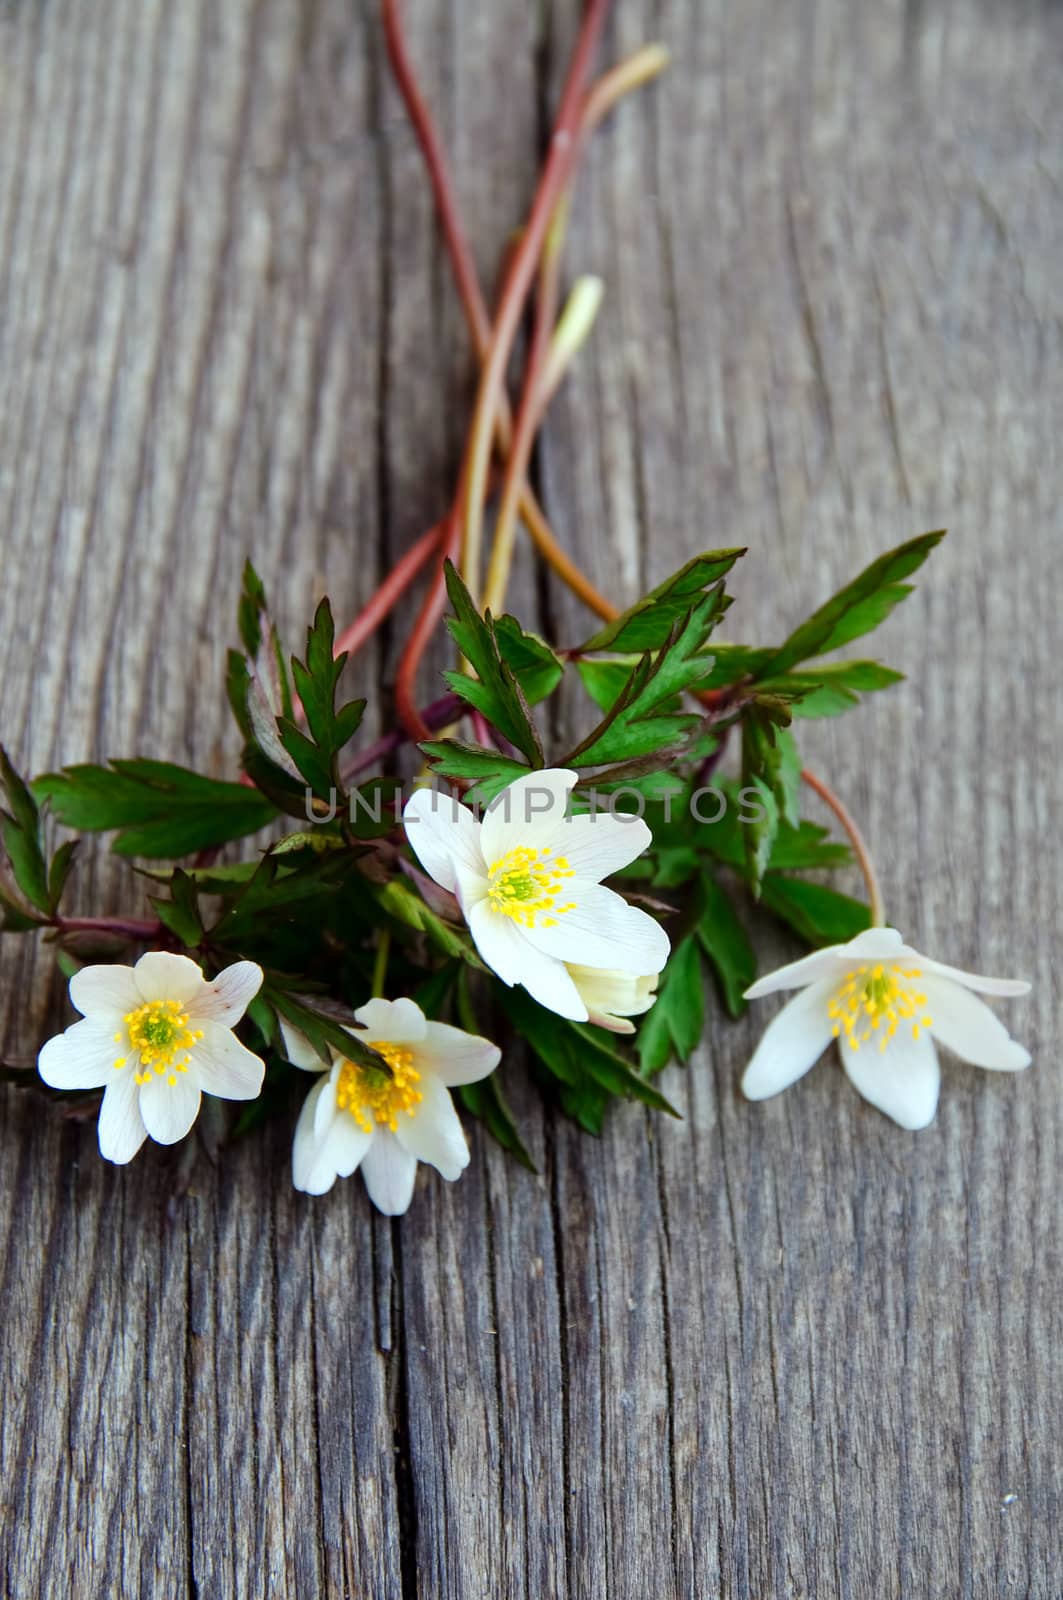 A bouquet of wood anemones by GryT